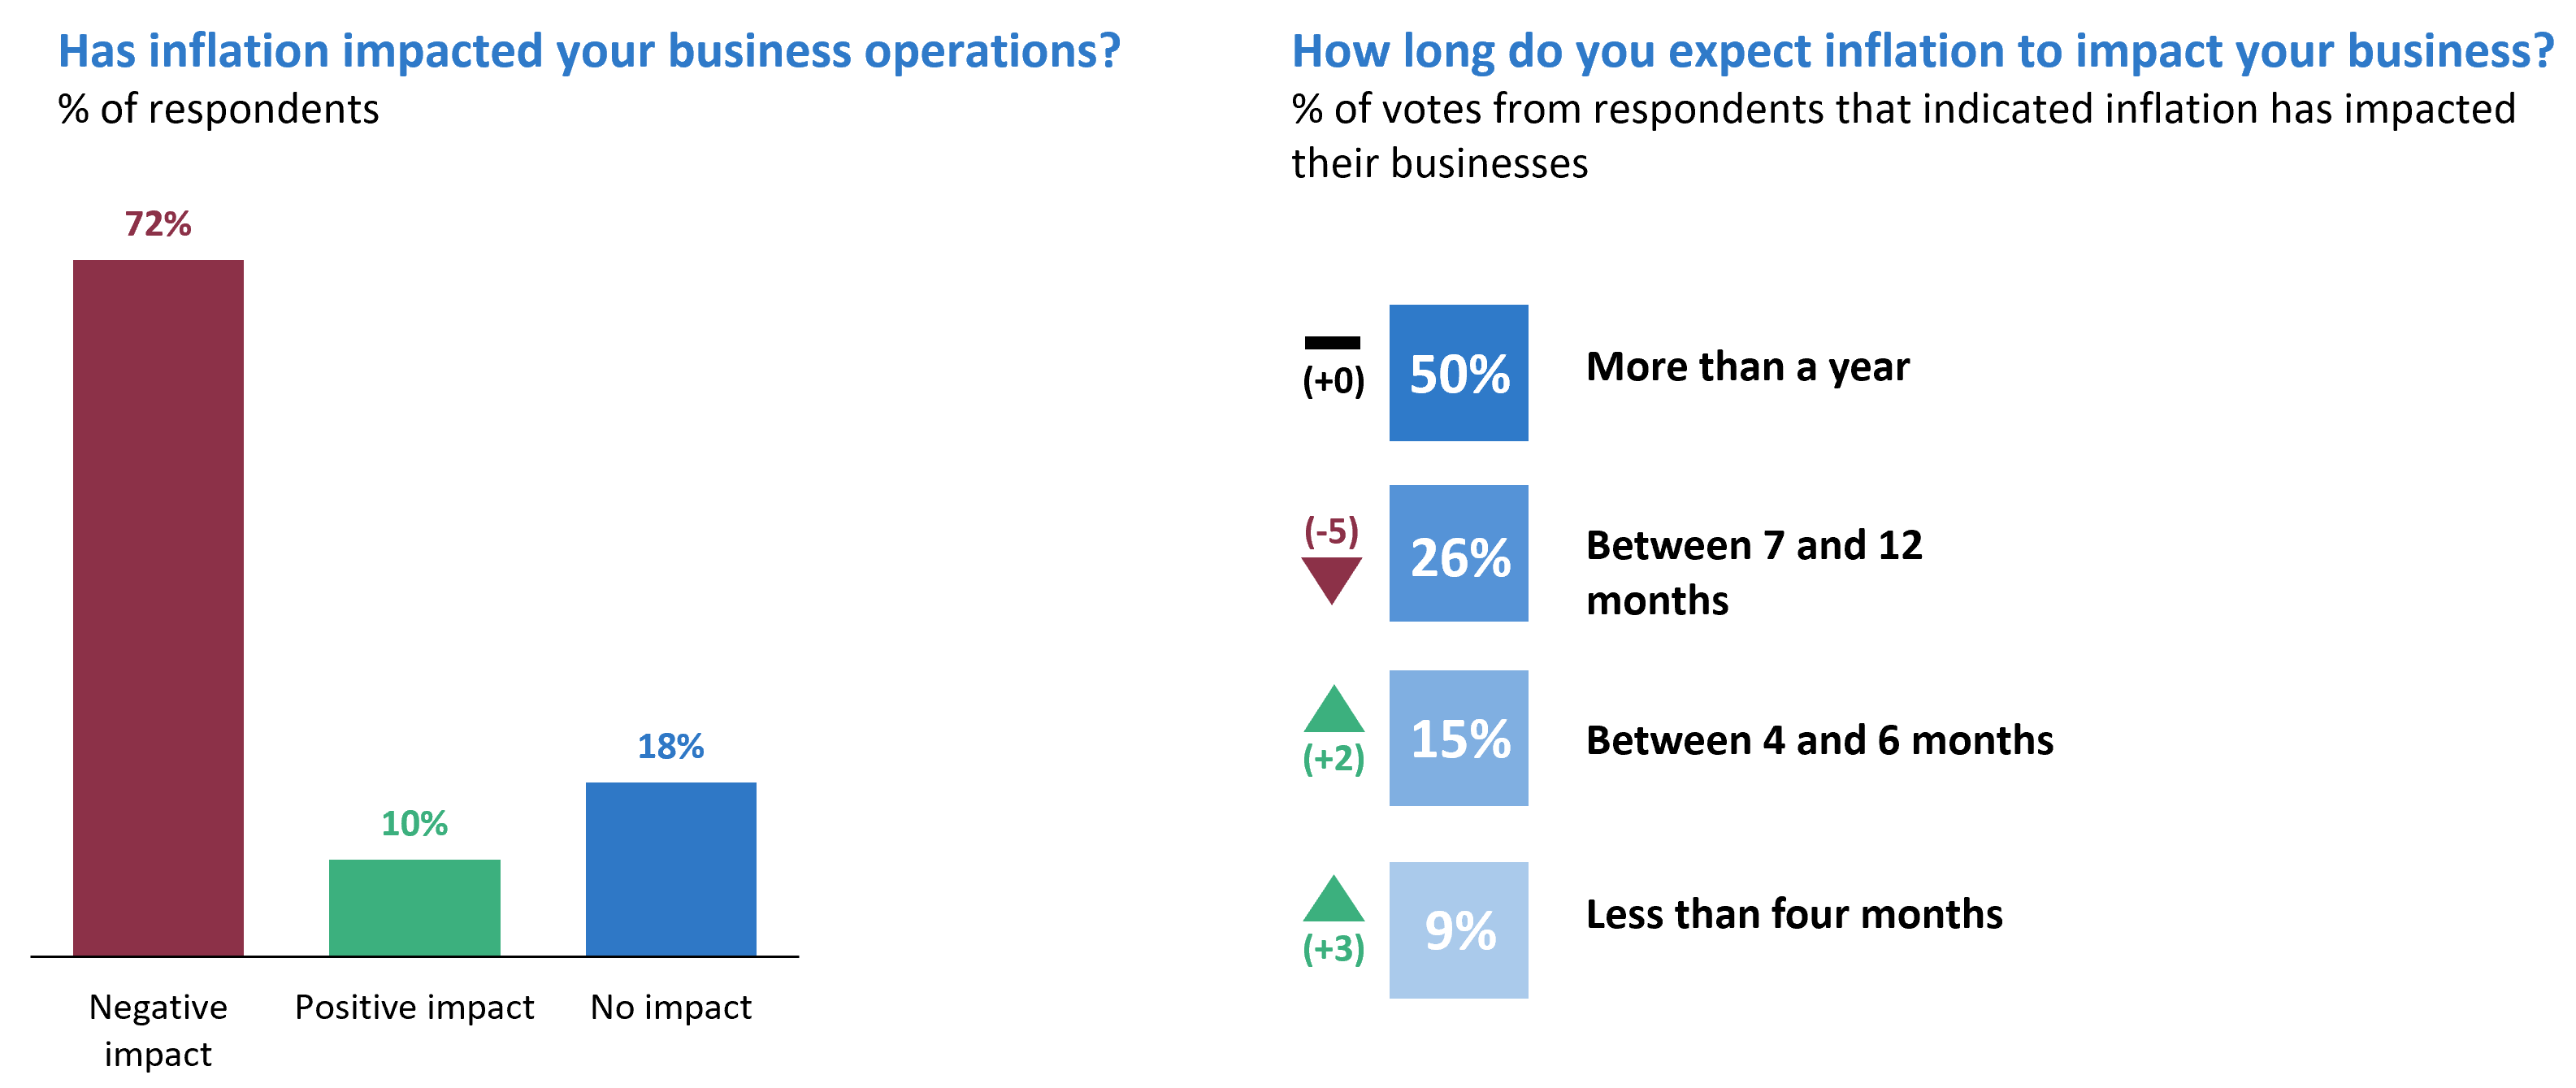 (on left). 72% say inflation has had a negative impact on business, (right). 50% of respondents expect inflation to impact their business for more than a year